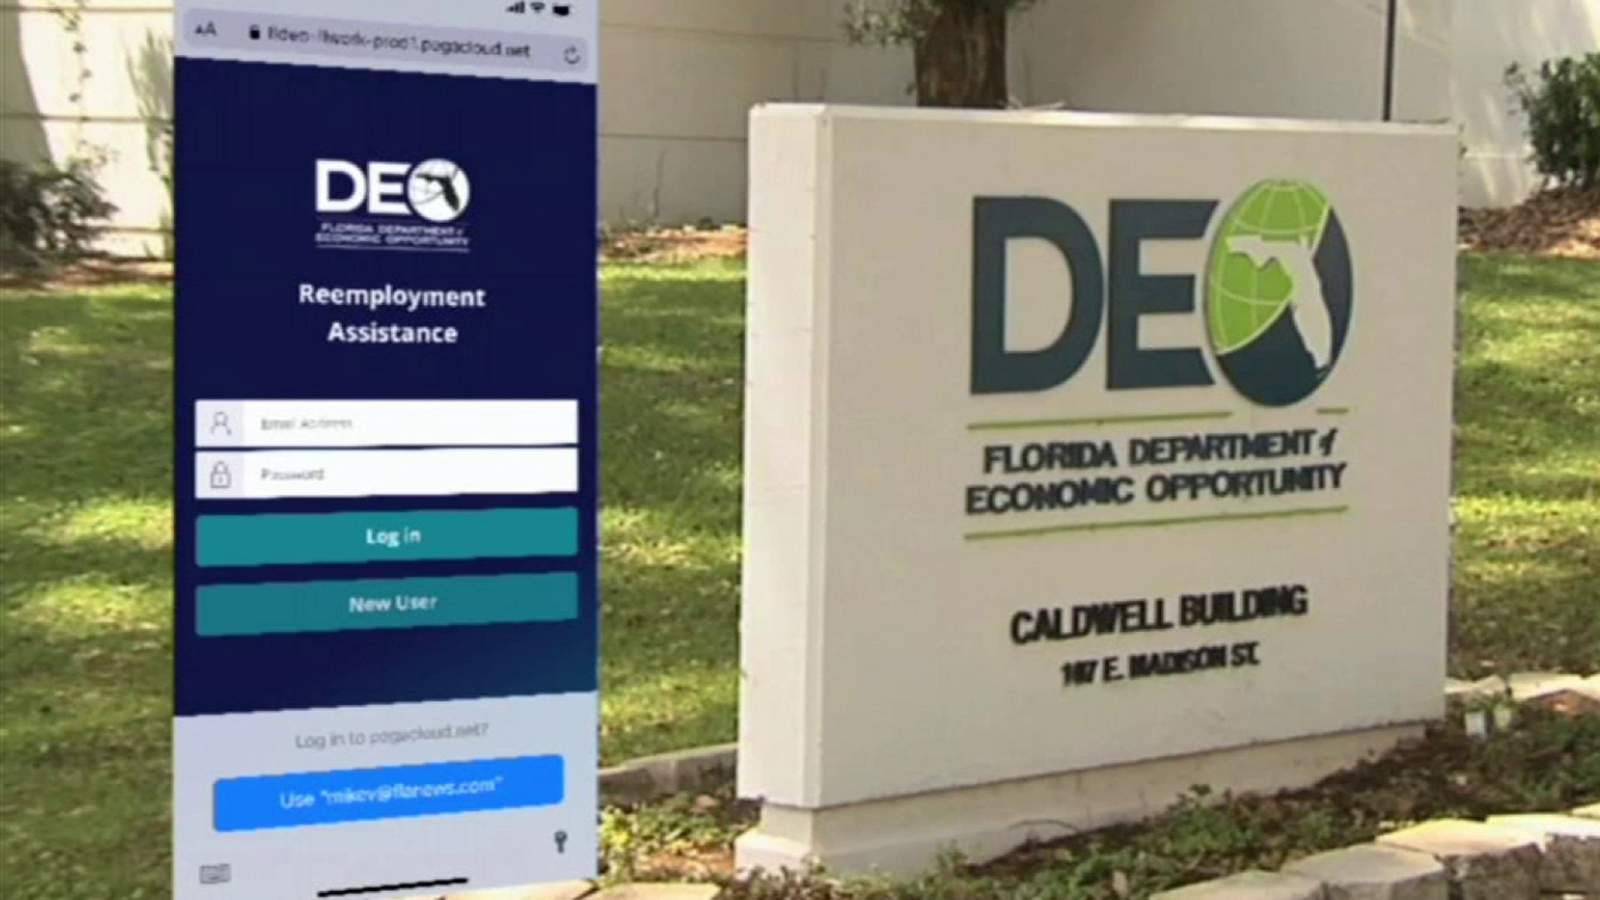 DEO director presents ambitious plan to fix Florida’s unemployment system